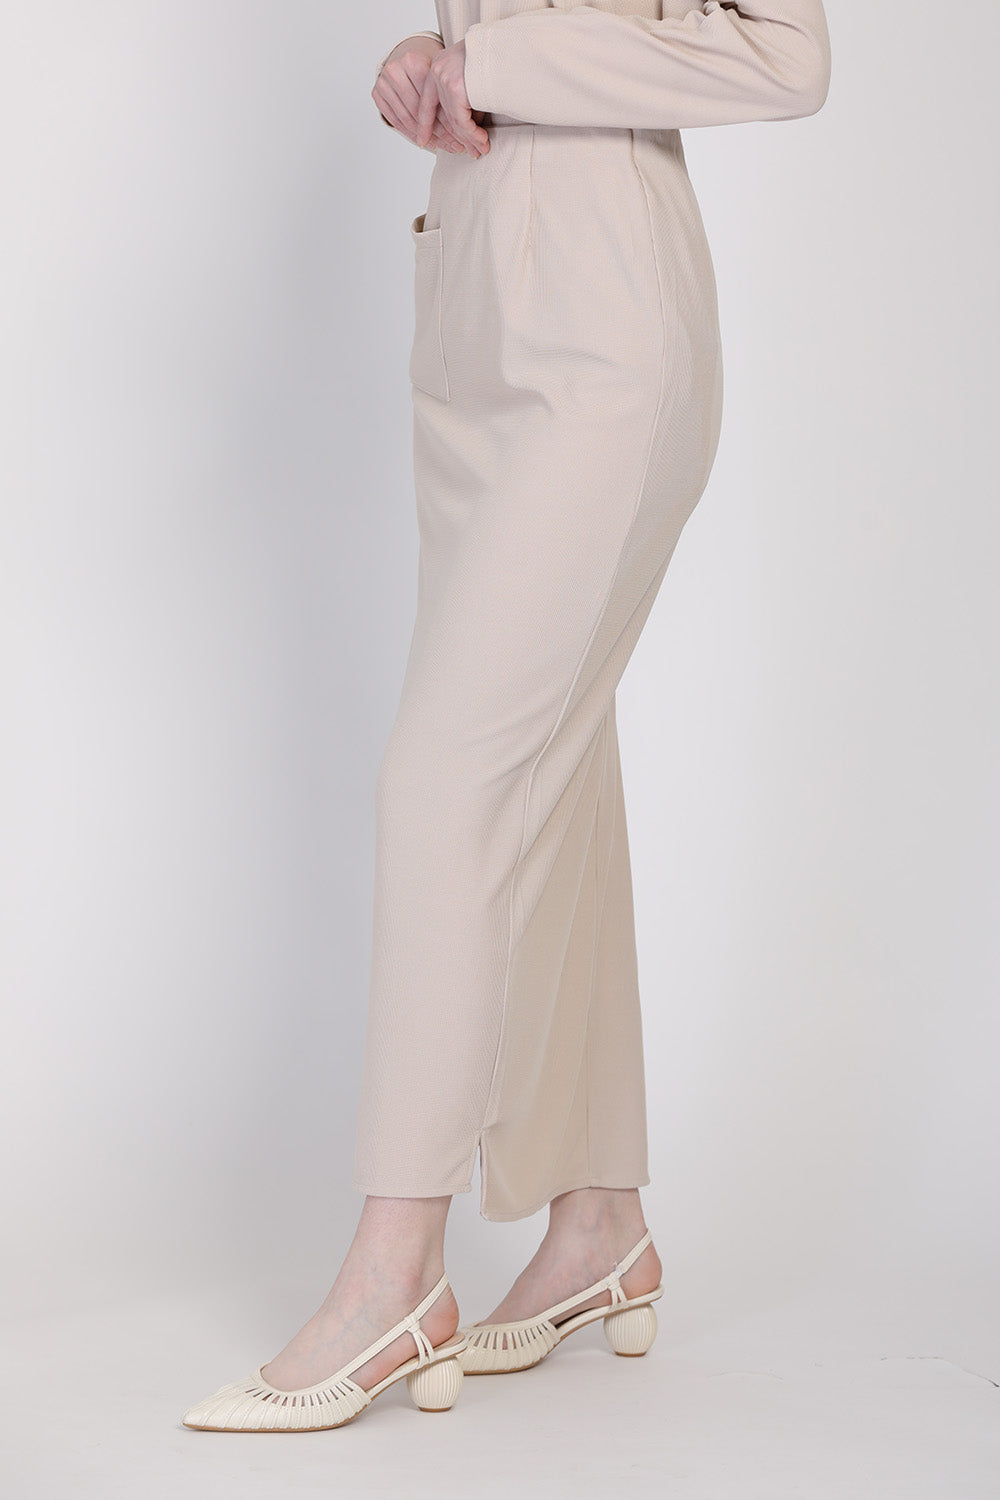 The Cahaya Knit Pencil Skirts in Apricot